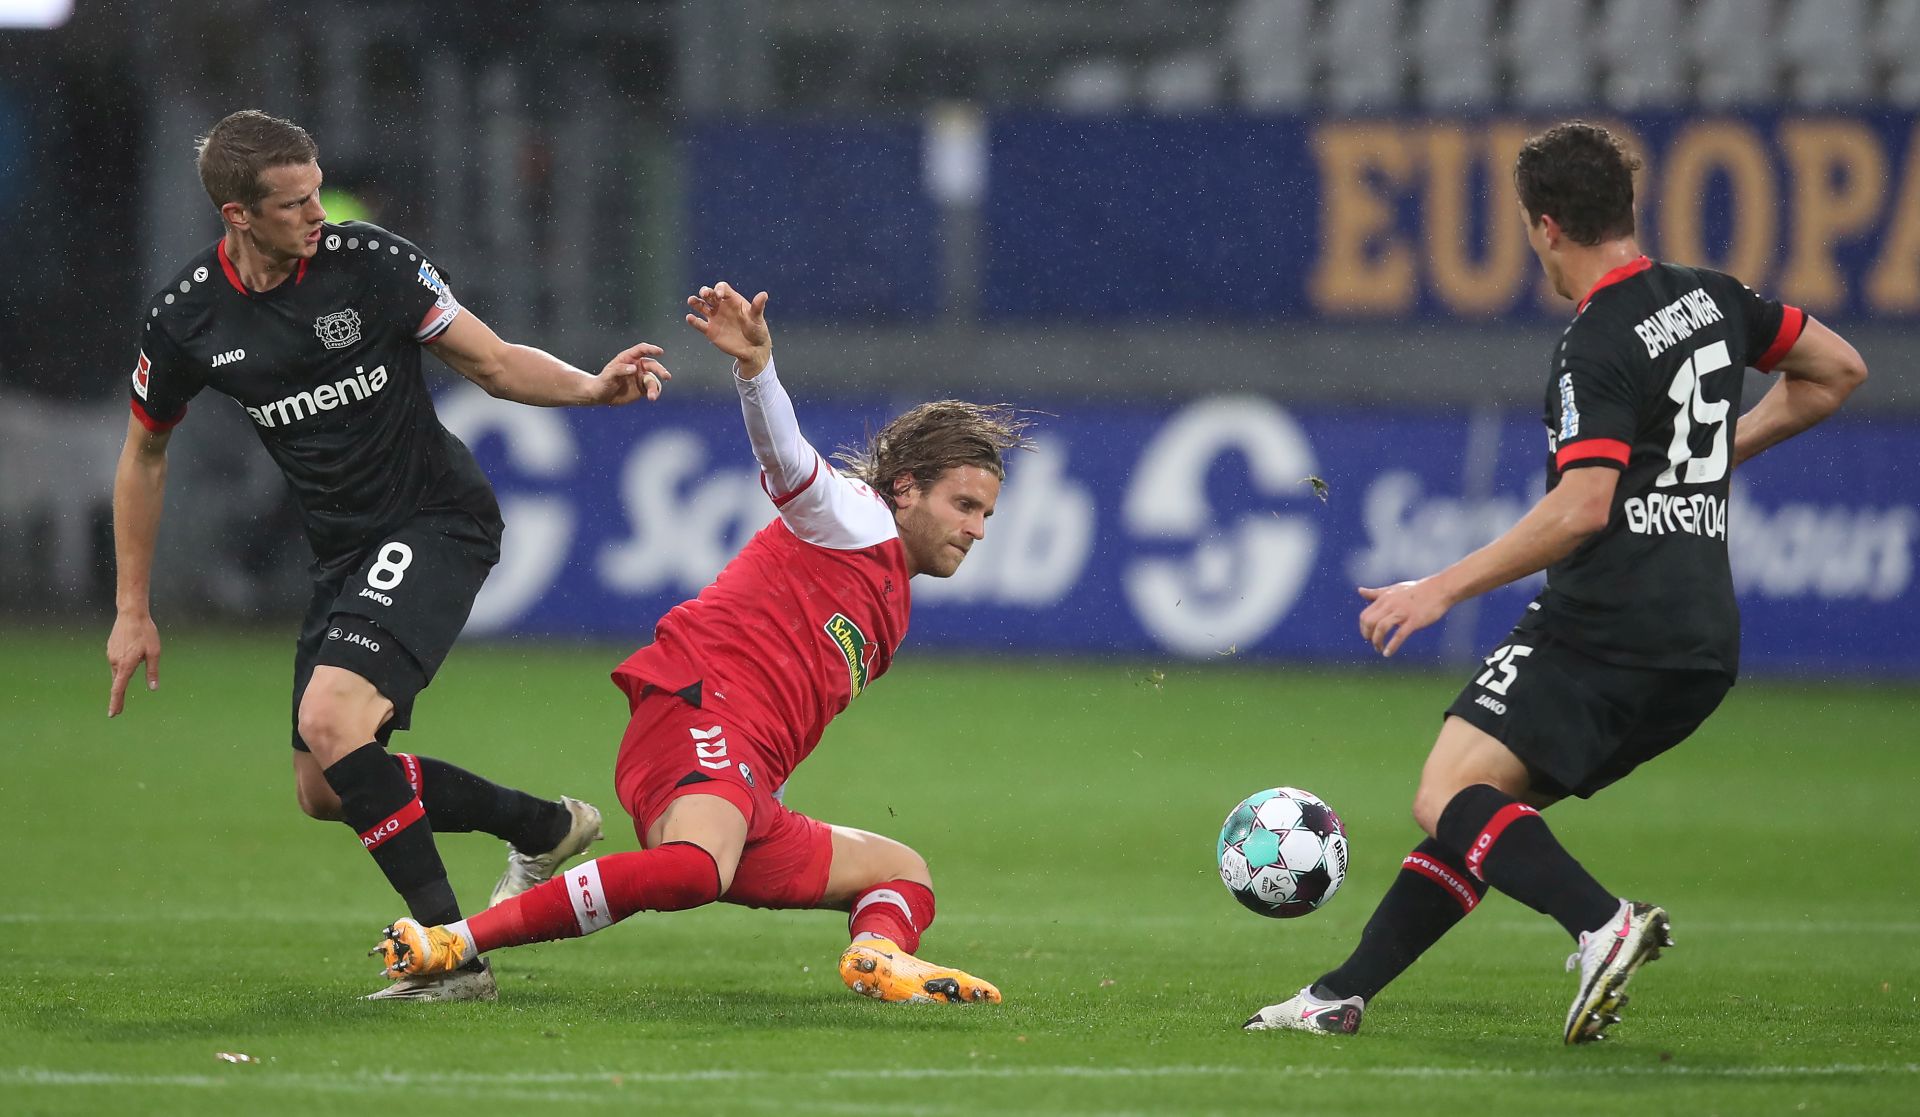 epa08791098 Lucas Hoeler (C) of Sport-Club Freiburg is challenged by Lars Bender (L) of Bayer Leverkusen during the German Bundesliga soccer match between Sport-Club Freiburg and Bayer 04 Leverkusen at Schwarzwald-Stadion in Freiburg im Breisgau, Germany, 01 November 2020.  EPA/ALEX GRIMM / POOL CONDITIONS - ATTENTION:  The DFL regulations prohibit any use of photographs as image sequences and/or quasi-video.